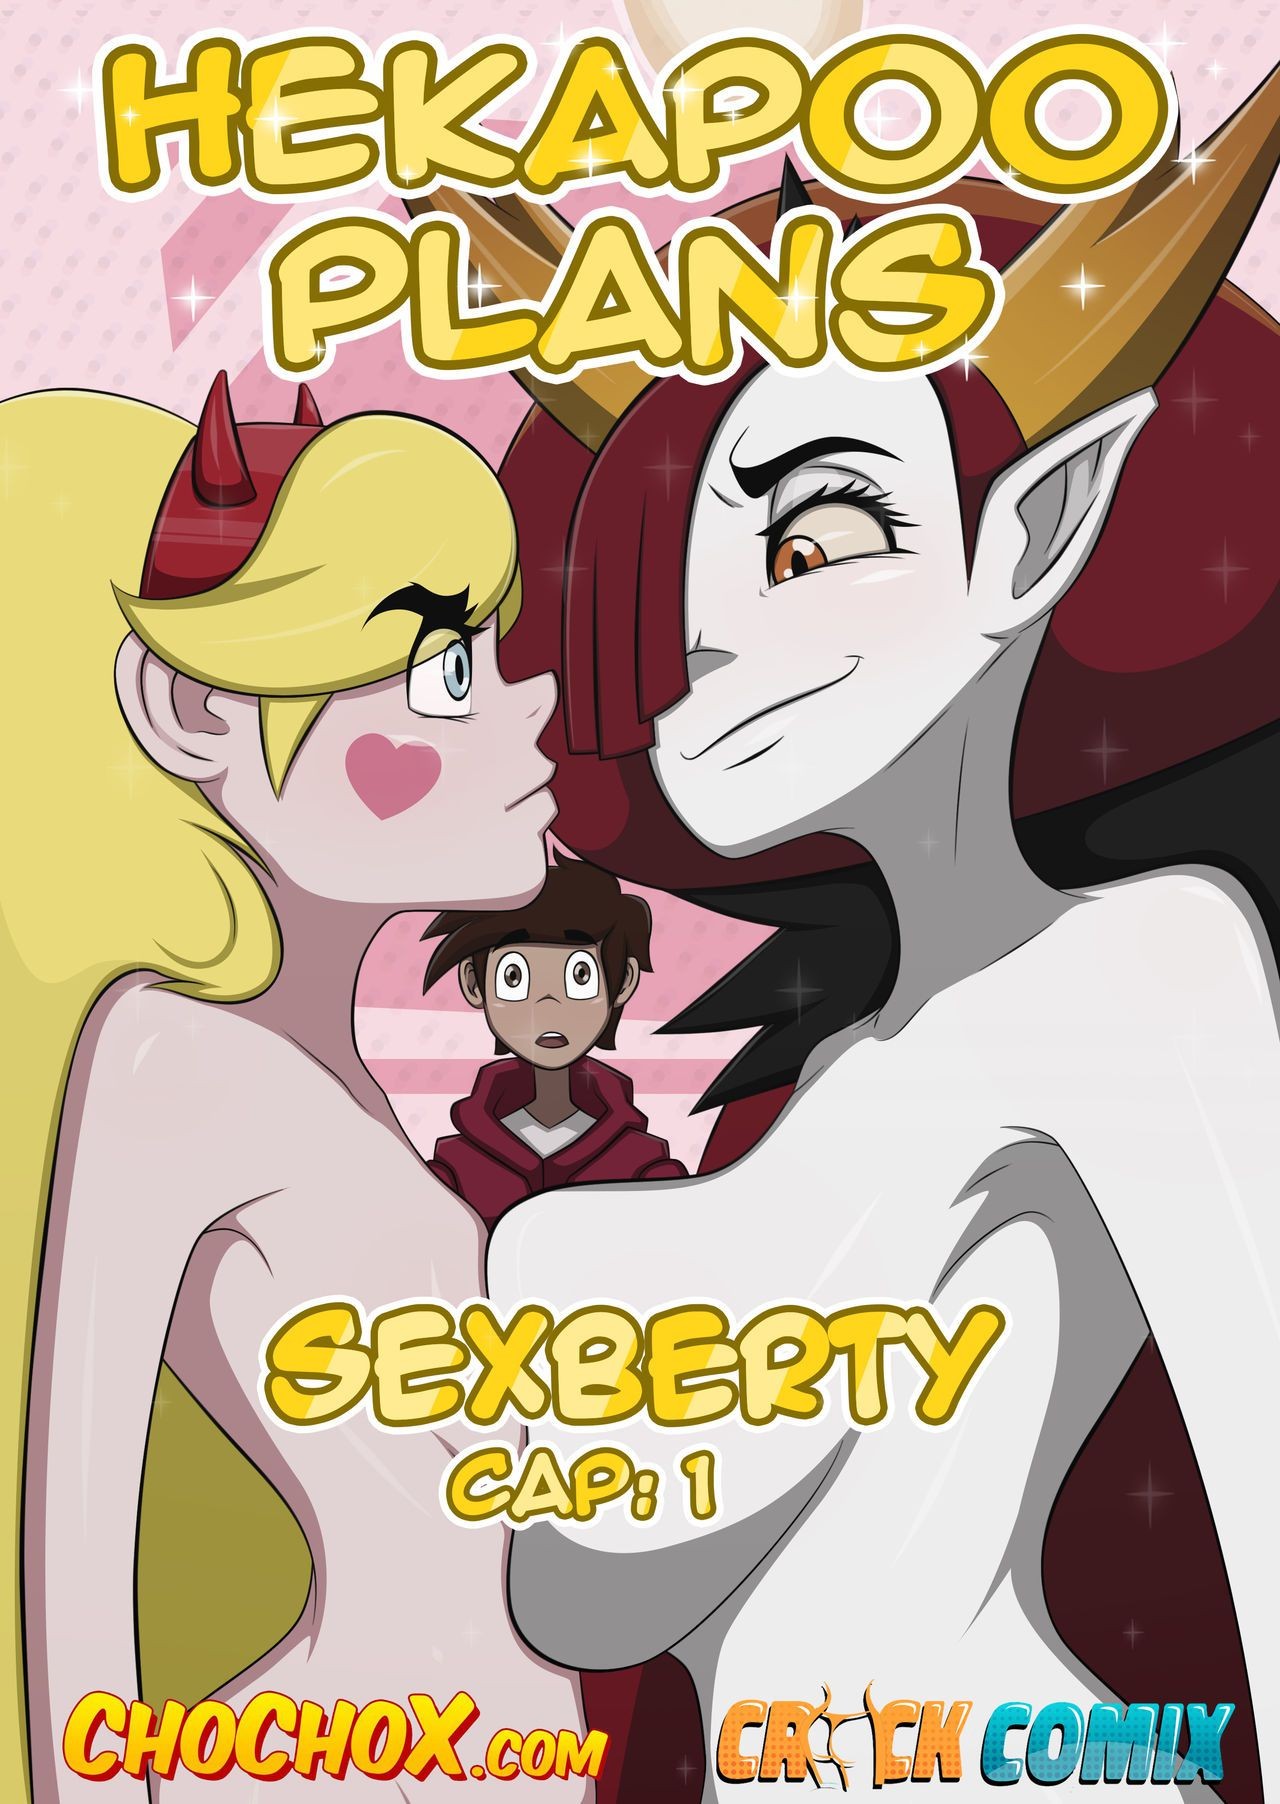 Tight Pussy Porn [Crock Comix] Hekapoo Plan’s - Sexberty 1 [ChoChoX] (Star Vs. The Forces Of Evil) Funny